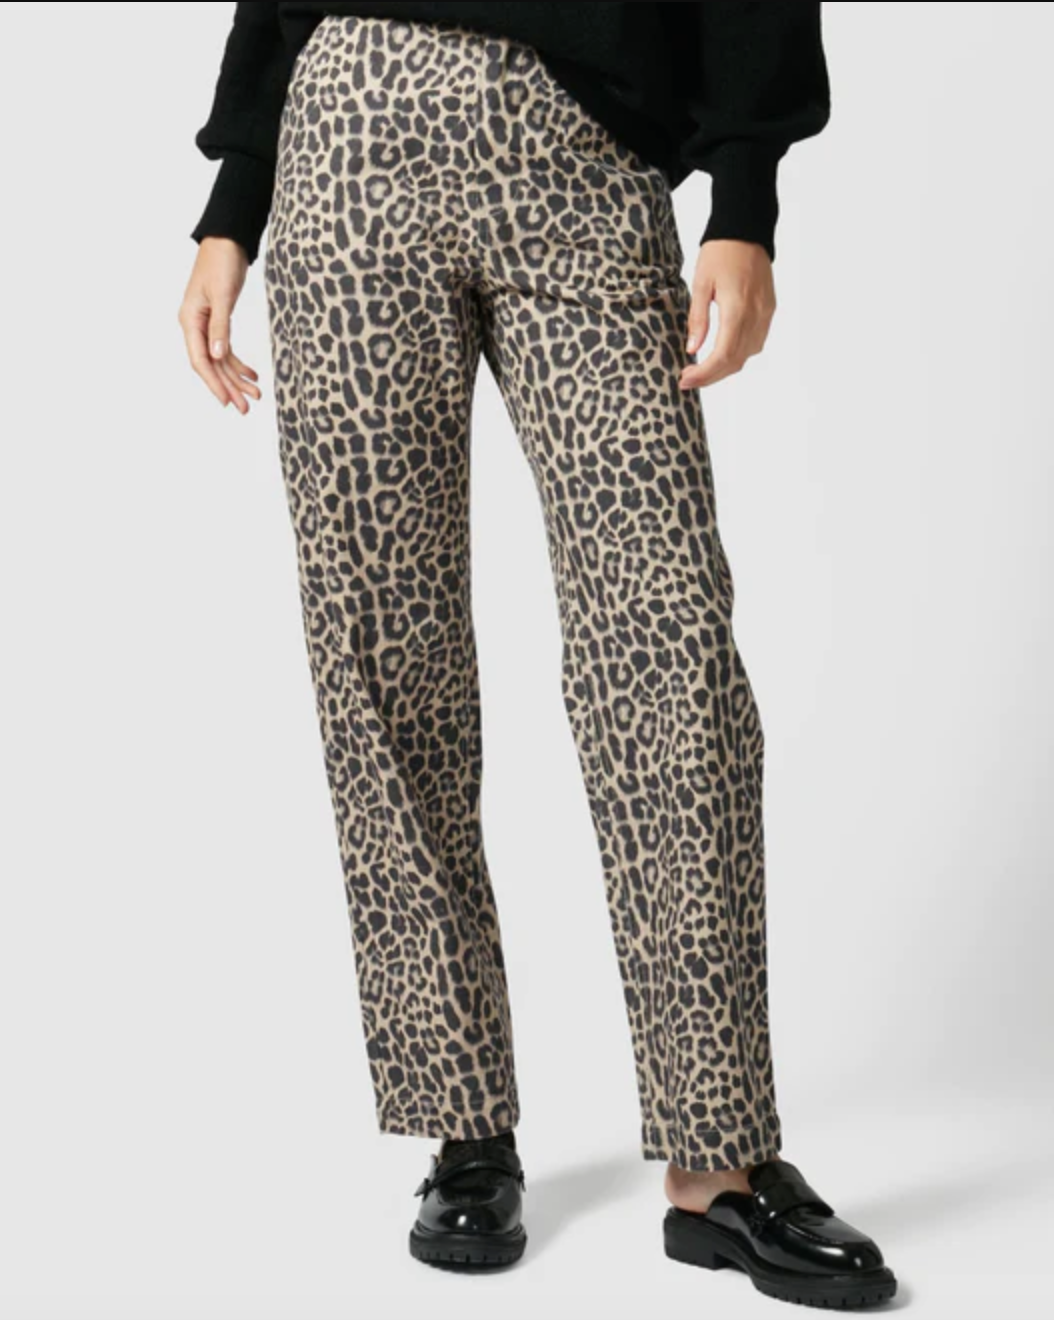 
                  
                    Aspen Pant The Aspen Pant is a 100% Cotton structured pant style designed with a high rise cut. In a bold Leopard, this piece features a button and zip closure and is completed with an elastic waistband at the back.
                  
                